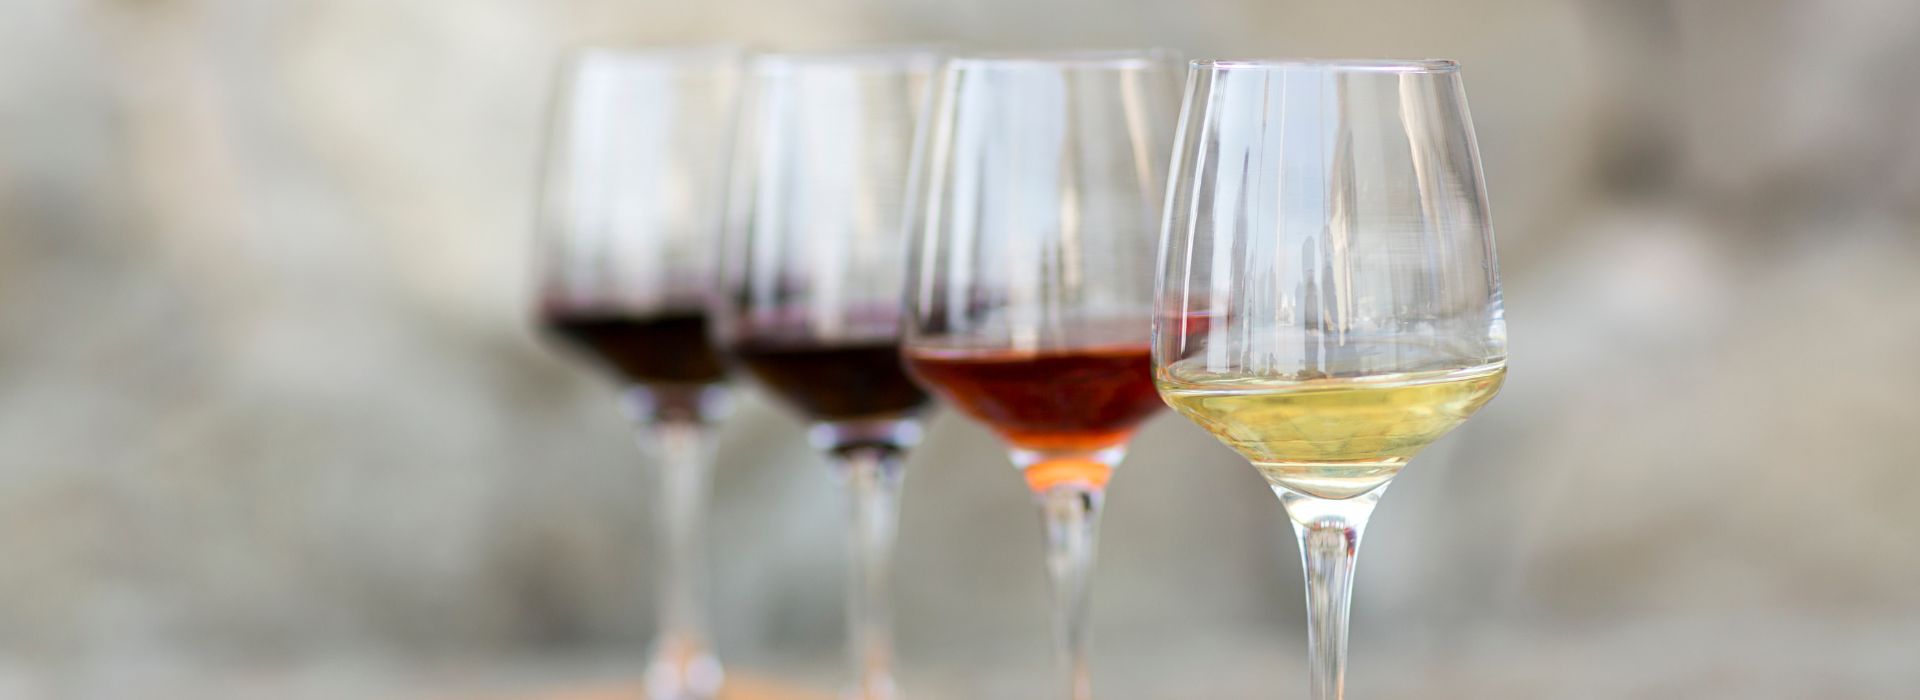 Four wine glasses partially filled with white, red and burgundy colored wines